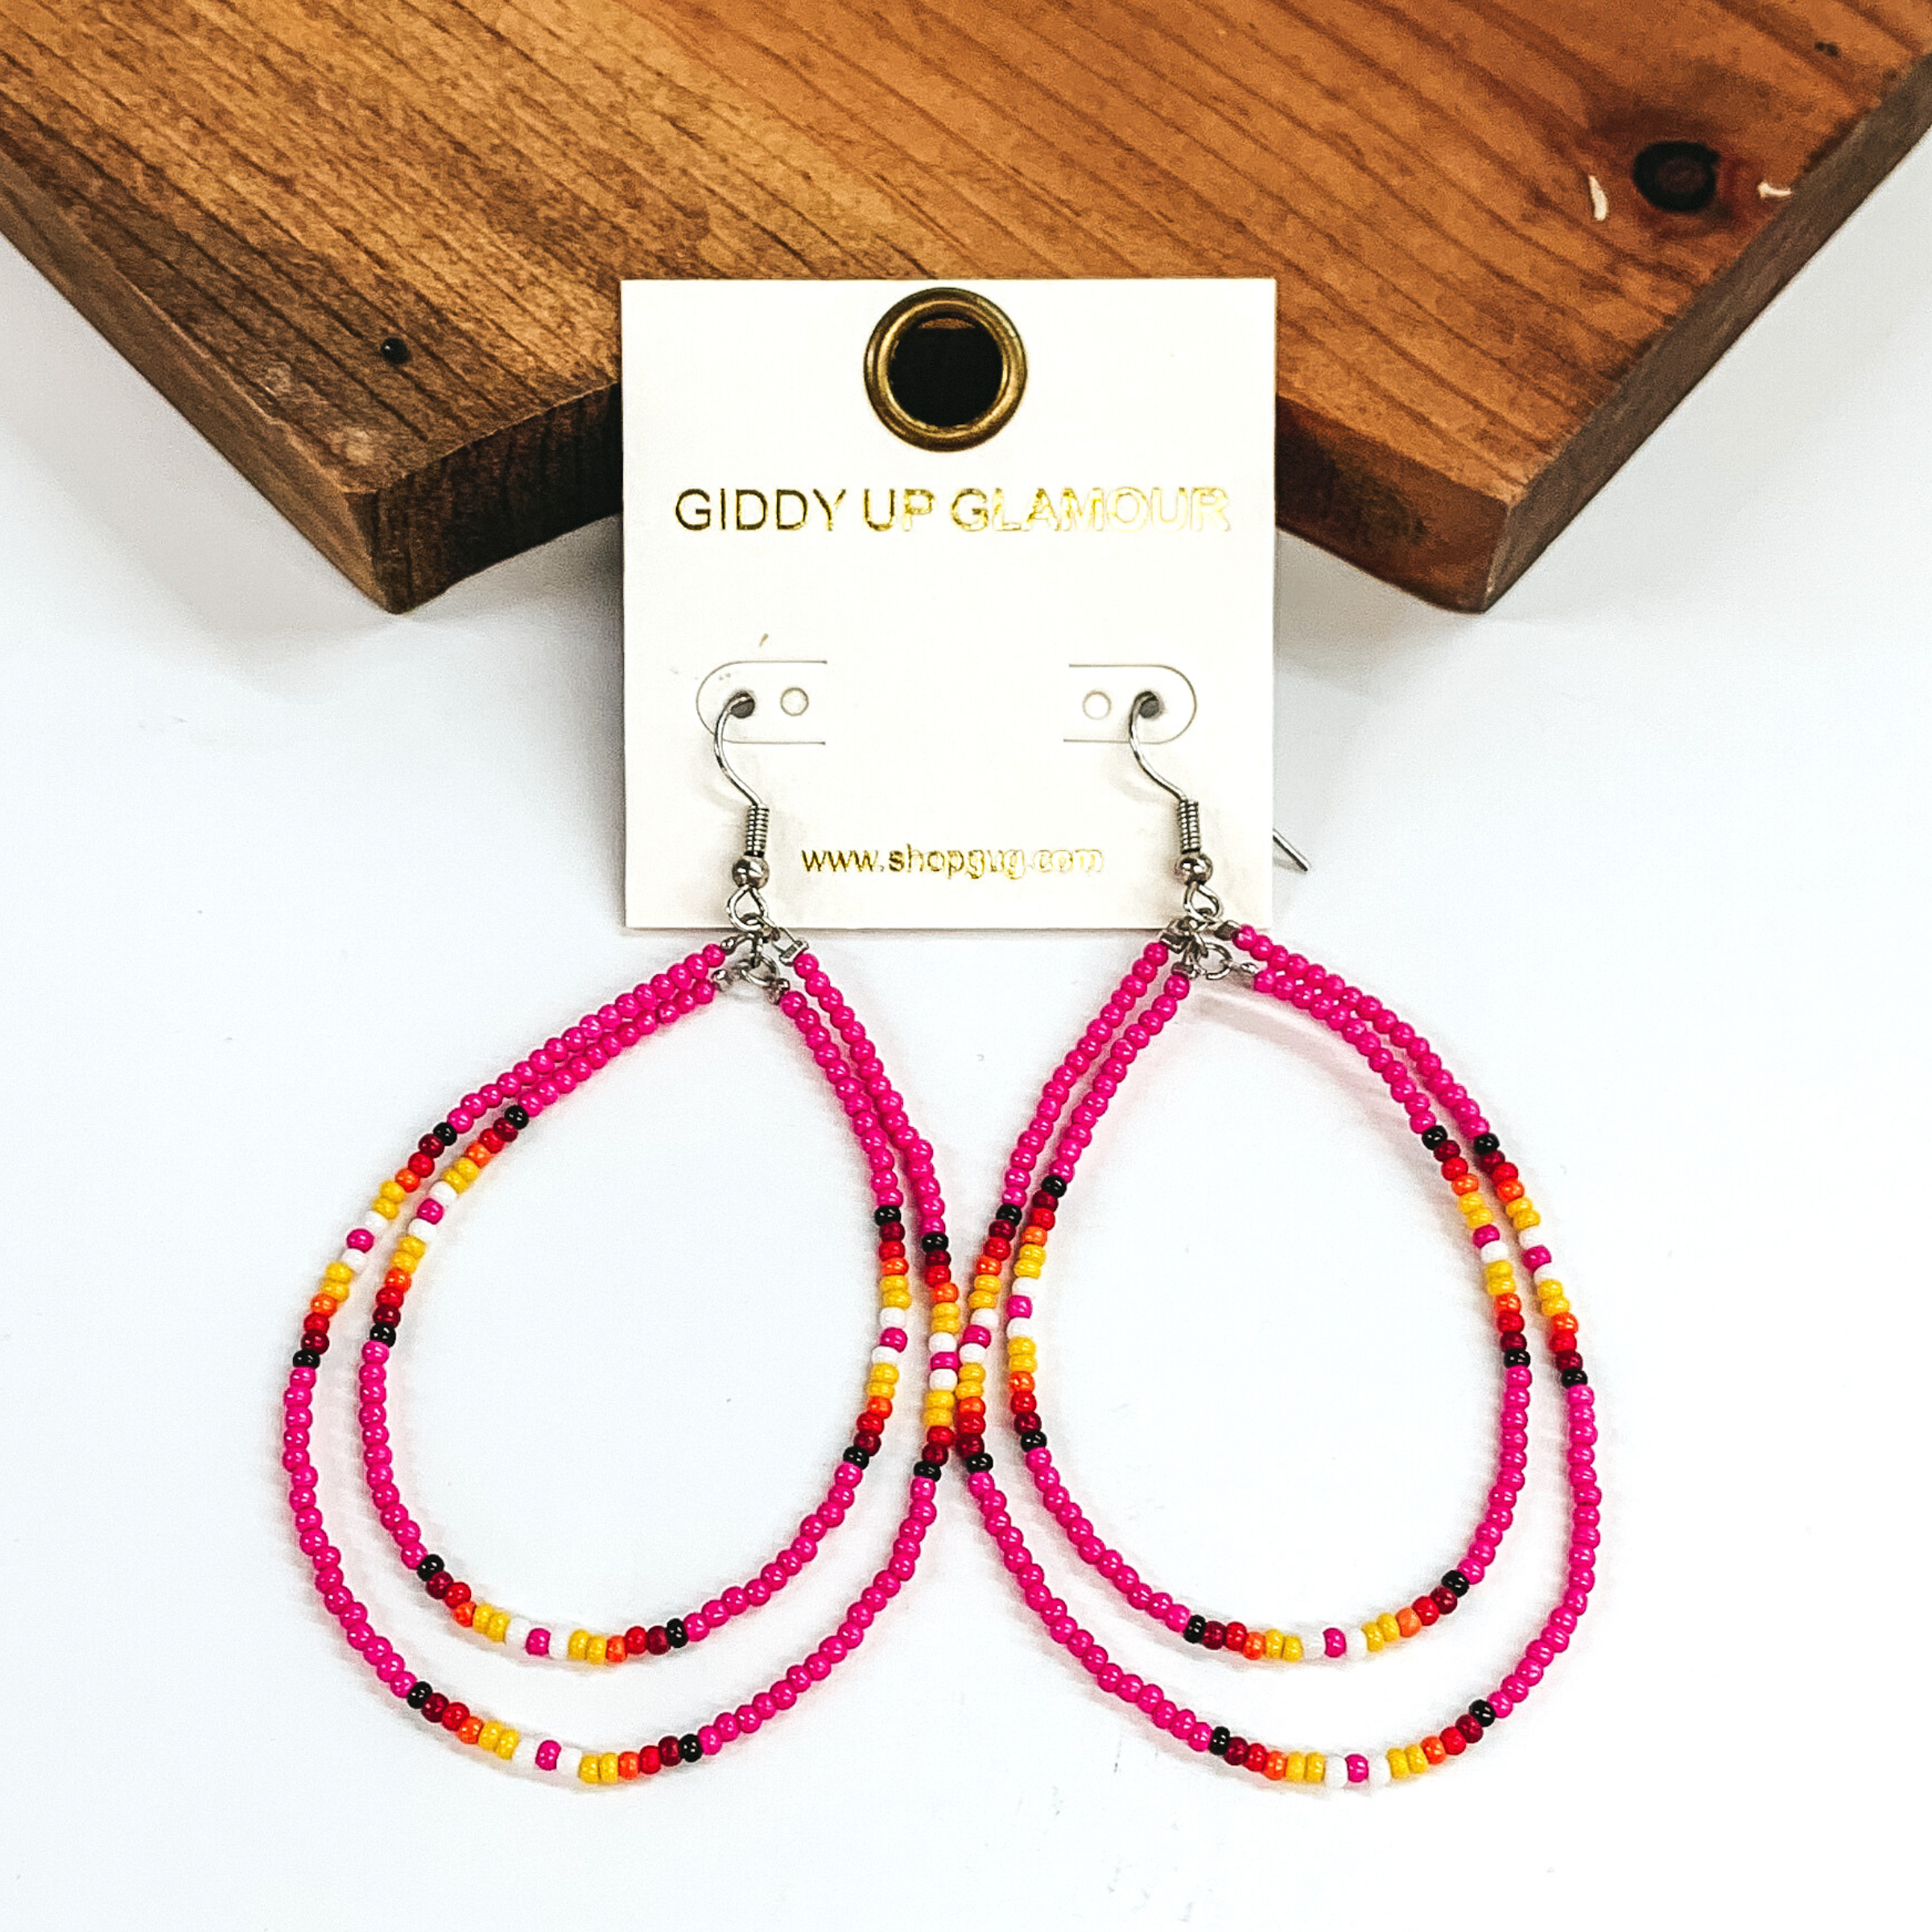 Double layered, hanging beaded teardrop earrings. The majority of the beads are pink with three segements including maroon, red, yellow, white, and black beads. hese earrings are pictured on a white background in front of a dark piece of wood. 